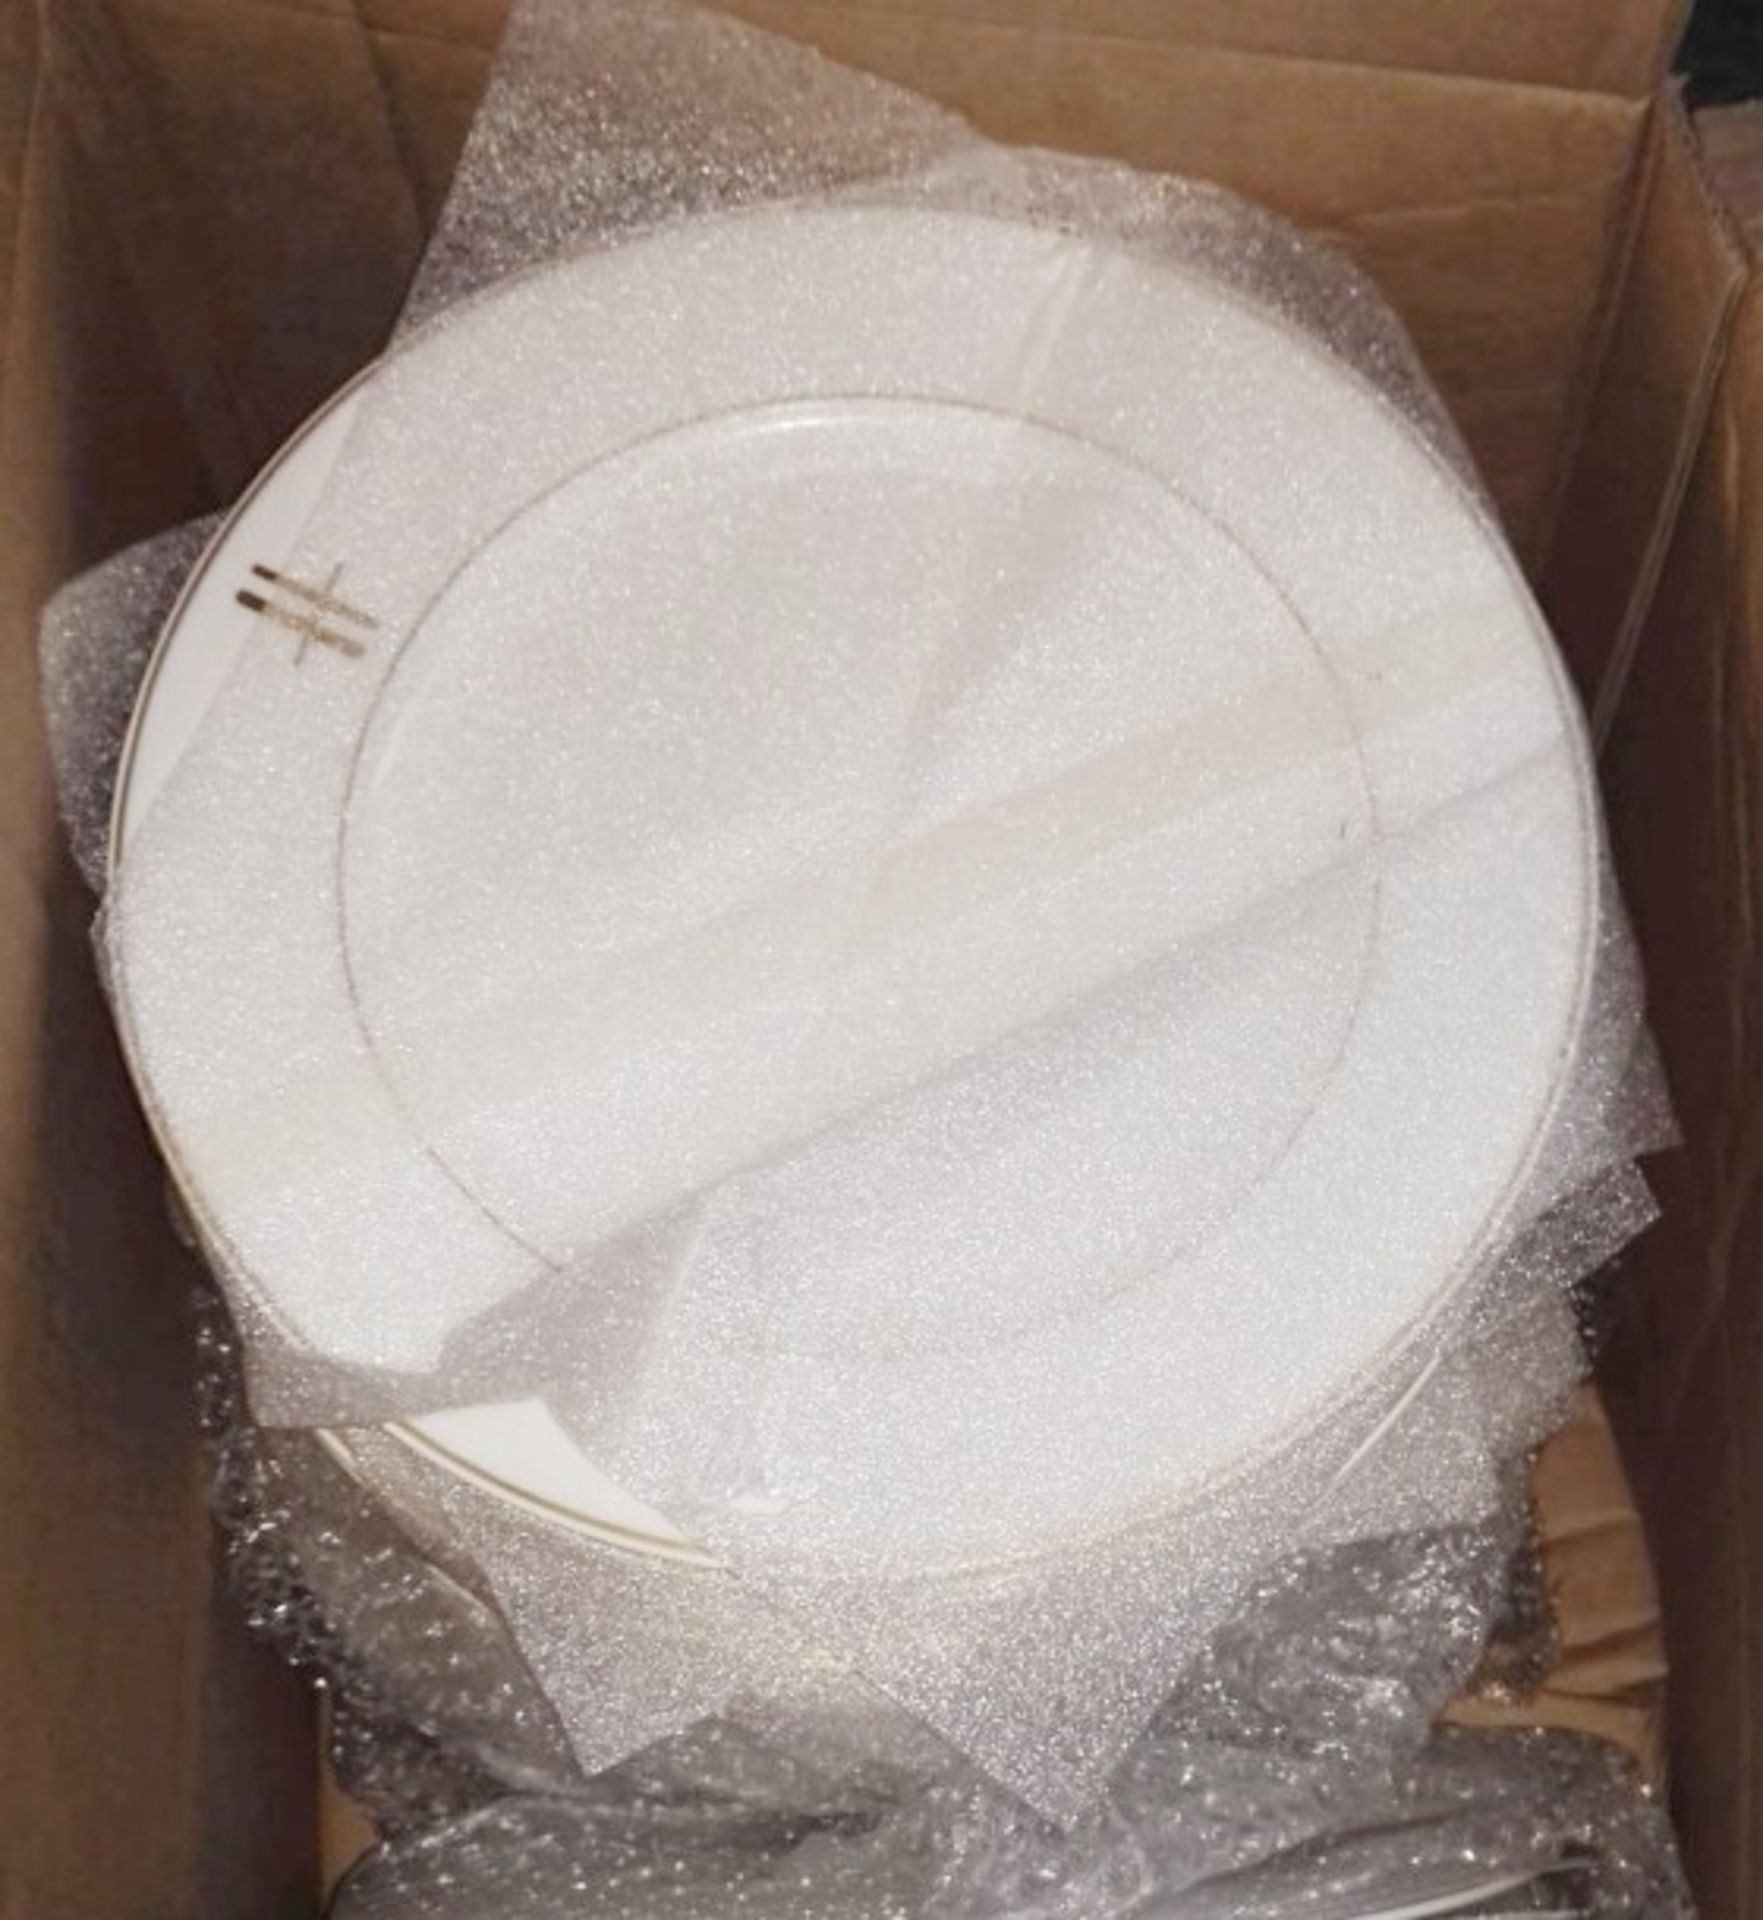 25 x PILLIVUYT Dinner Plates In White Featuring 'Famous Branding' In Gold - Dimensions: 27.4cm - Image 3 of 4